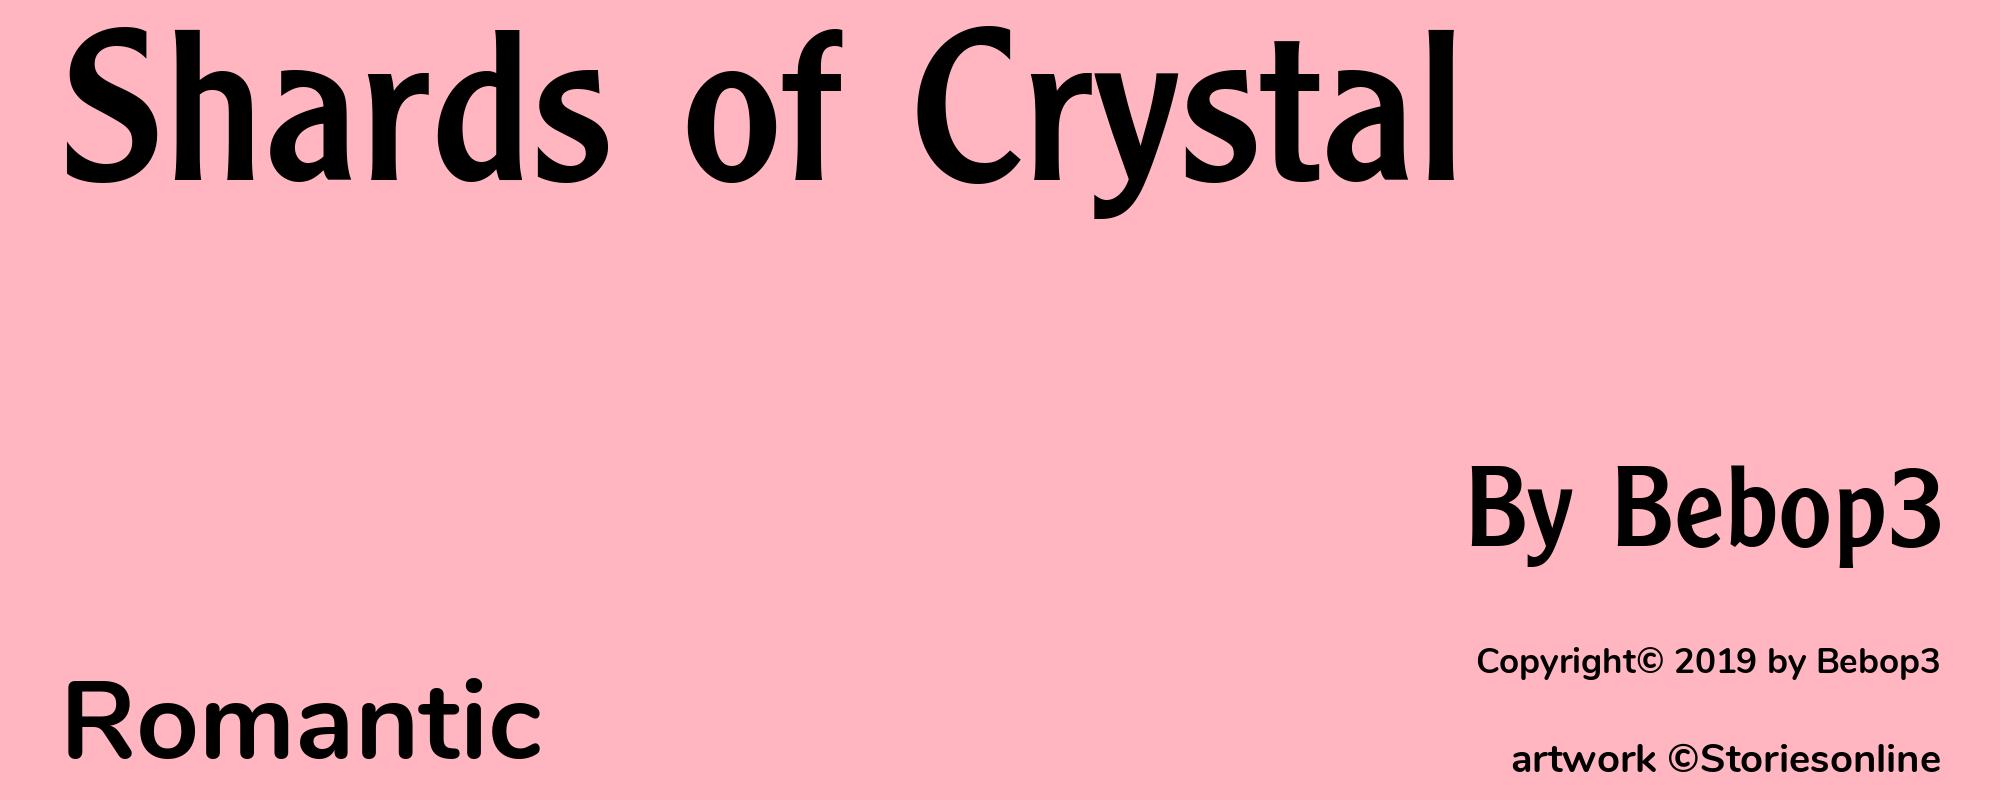 Shards of Crystal - Cover